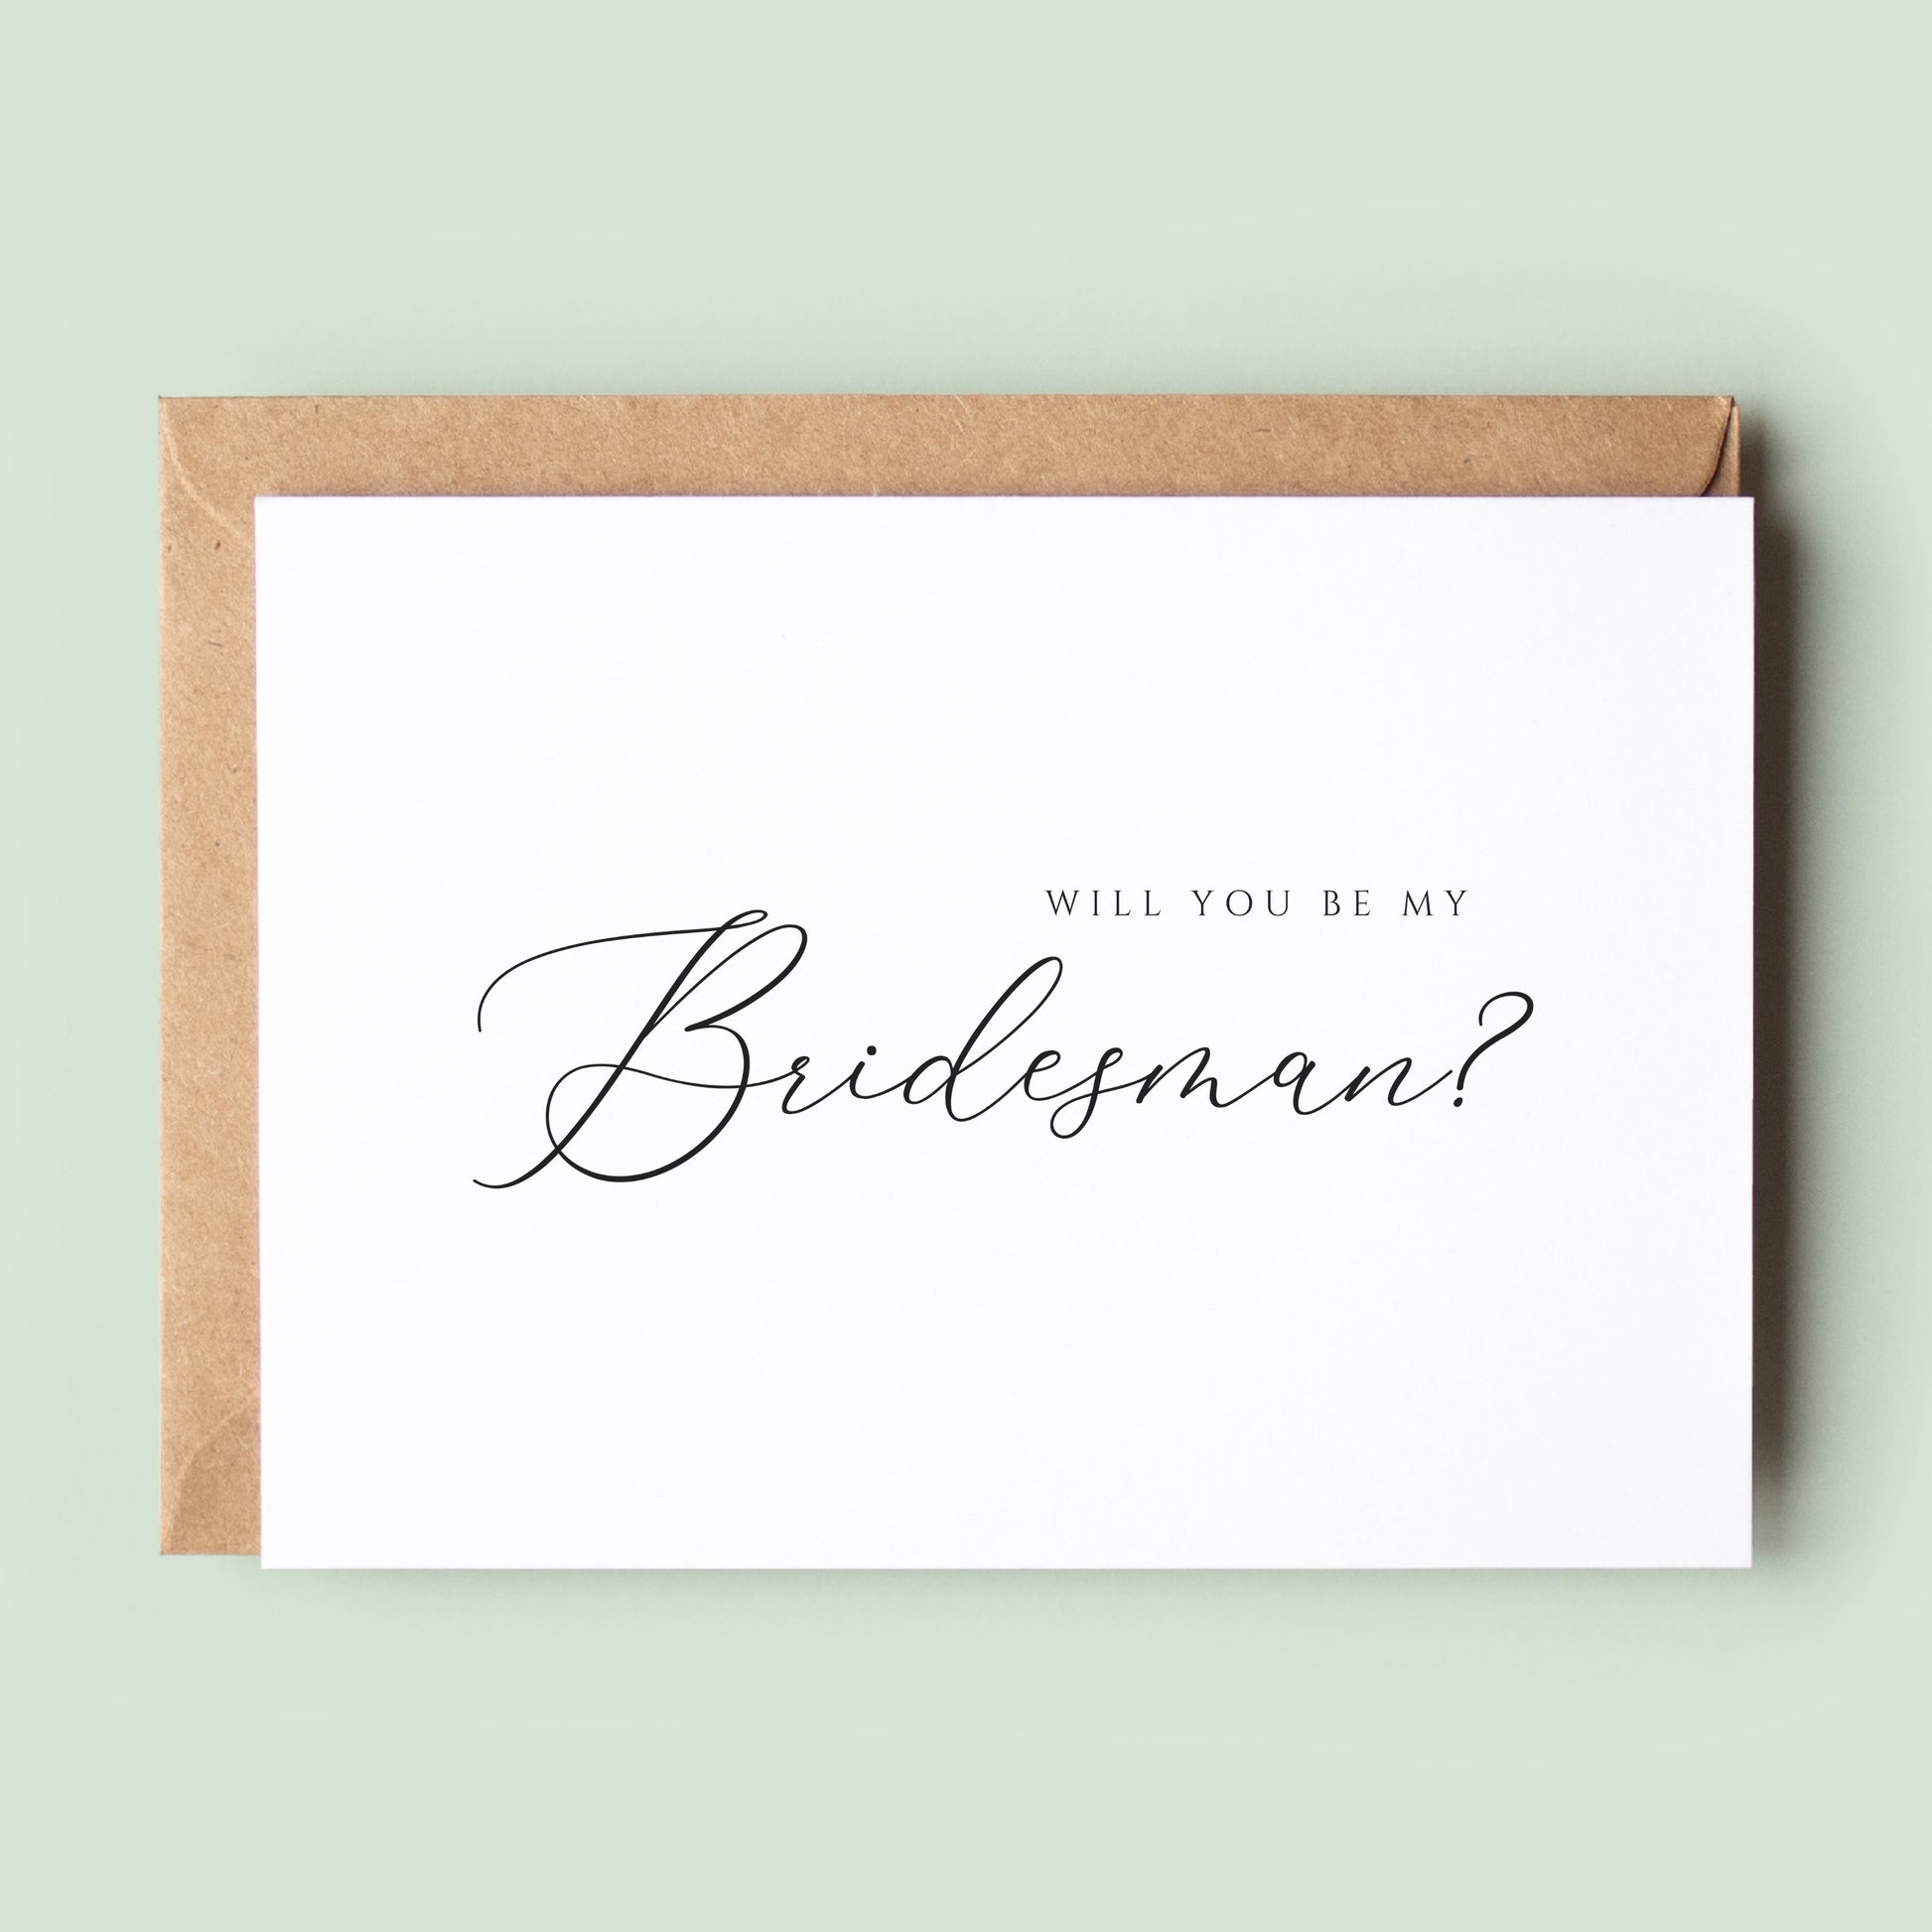 Classic Will You Be My Bridesmate Card, Will You Be My Bridesmate Wedding Card, Card To Bridesmate, Bridesmate Proposal, Greeting Card